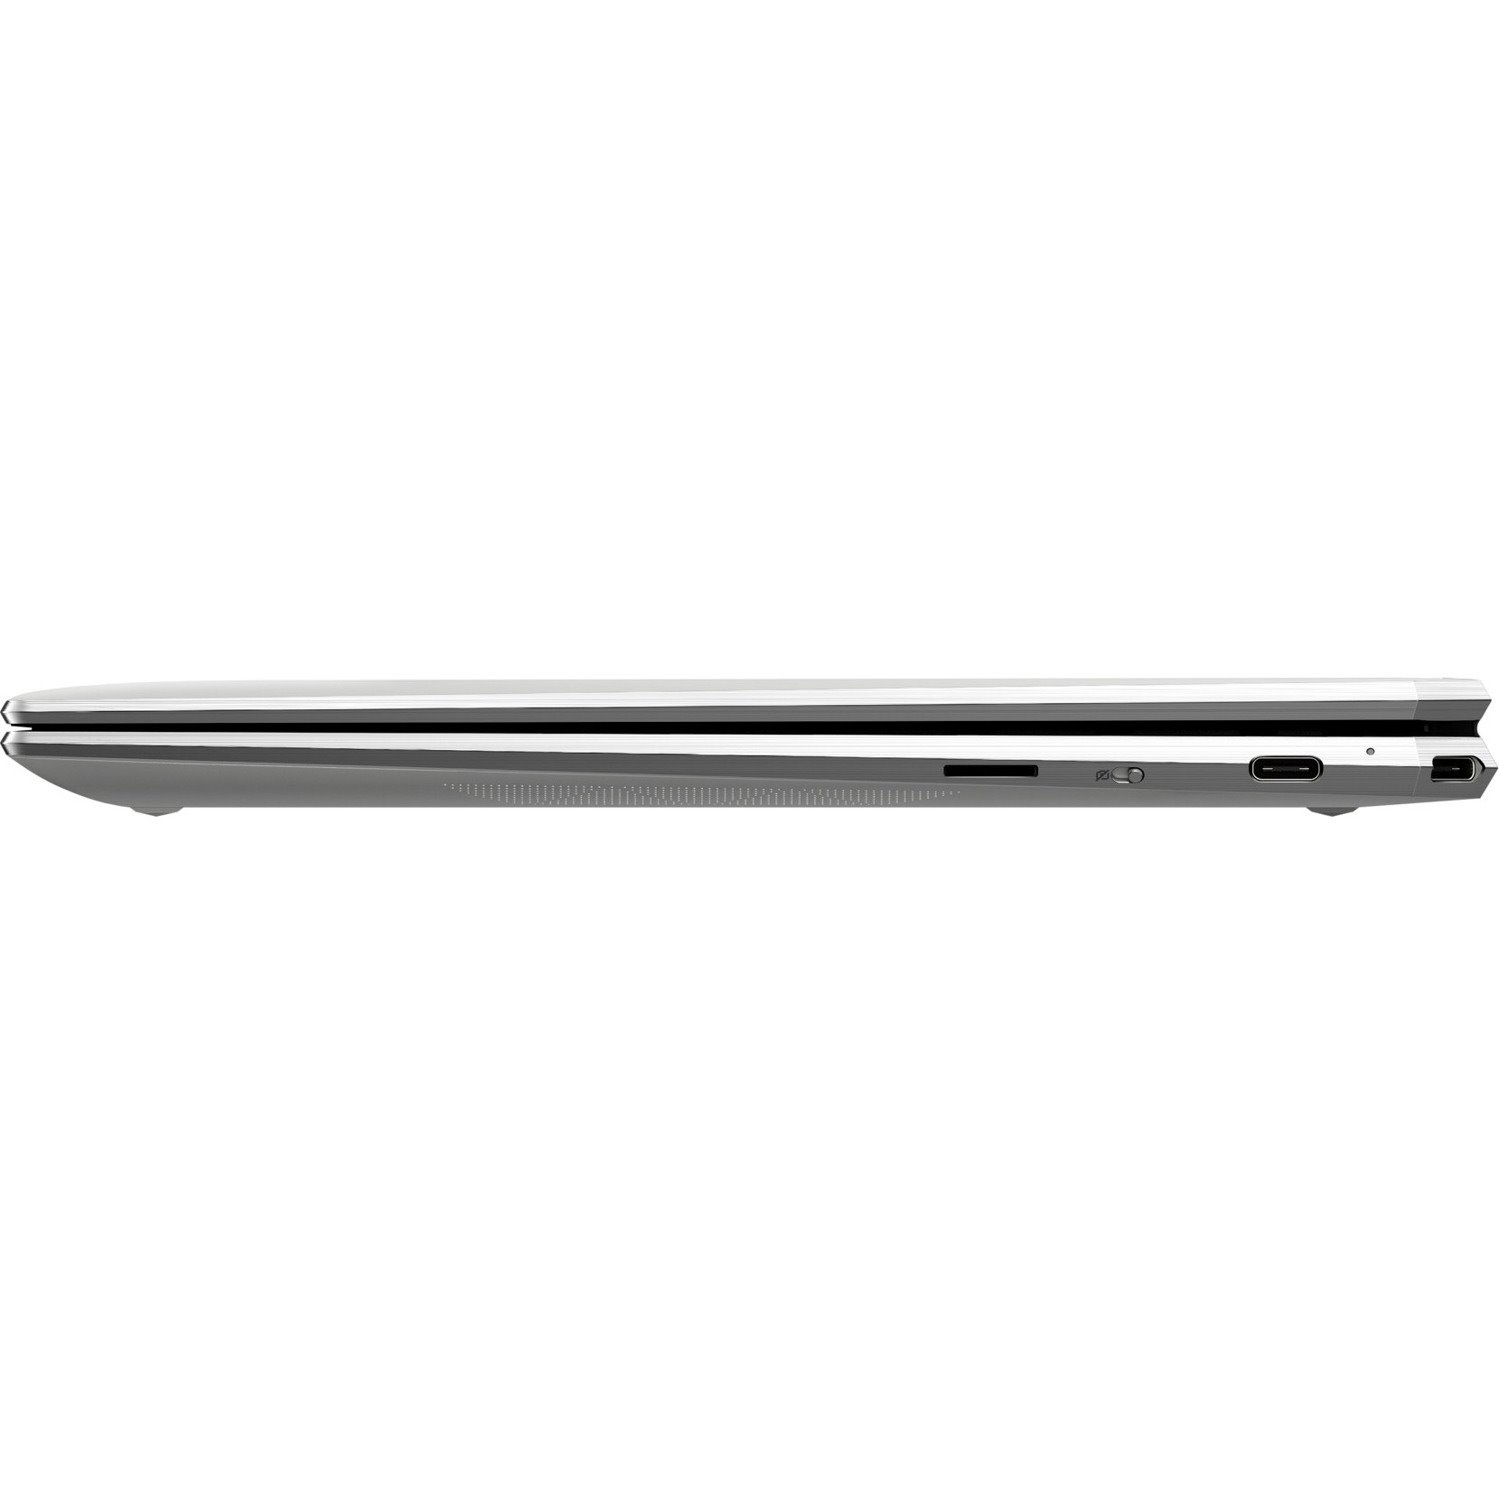 HP Spectre x360 13-aw0000 13-aw0125tu 13.3" Touchscreen Convertible 2 in 1 Notebook - 1920 x 1080 - Intel Core i7 10th Gen i7-1065G7 Quad-core (4 Core) 1.30 GHz - 16 GB Total RAM - 1 TB SSD - Natural Silver